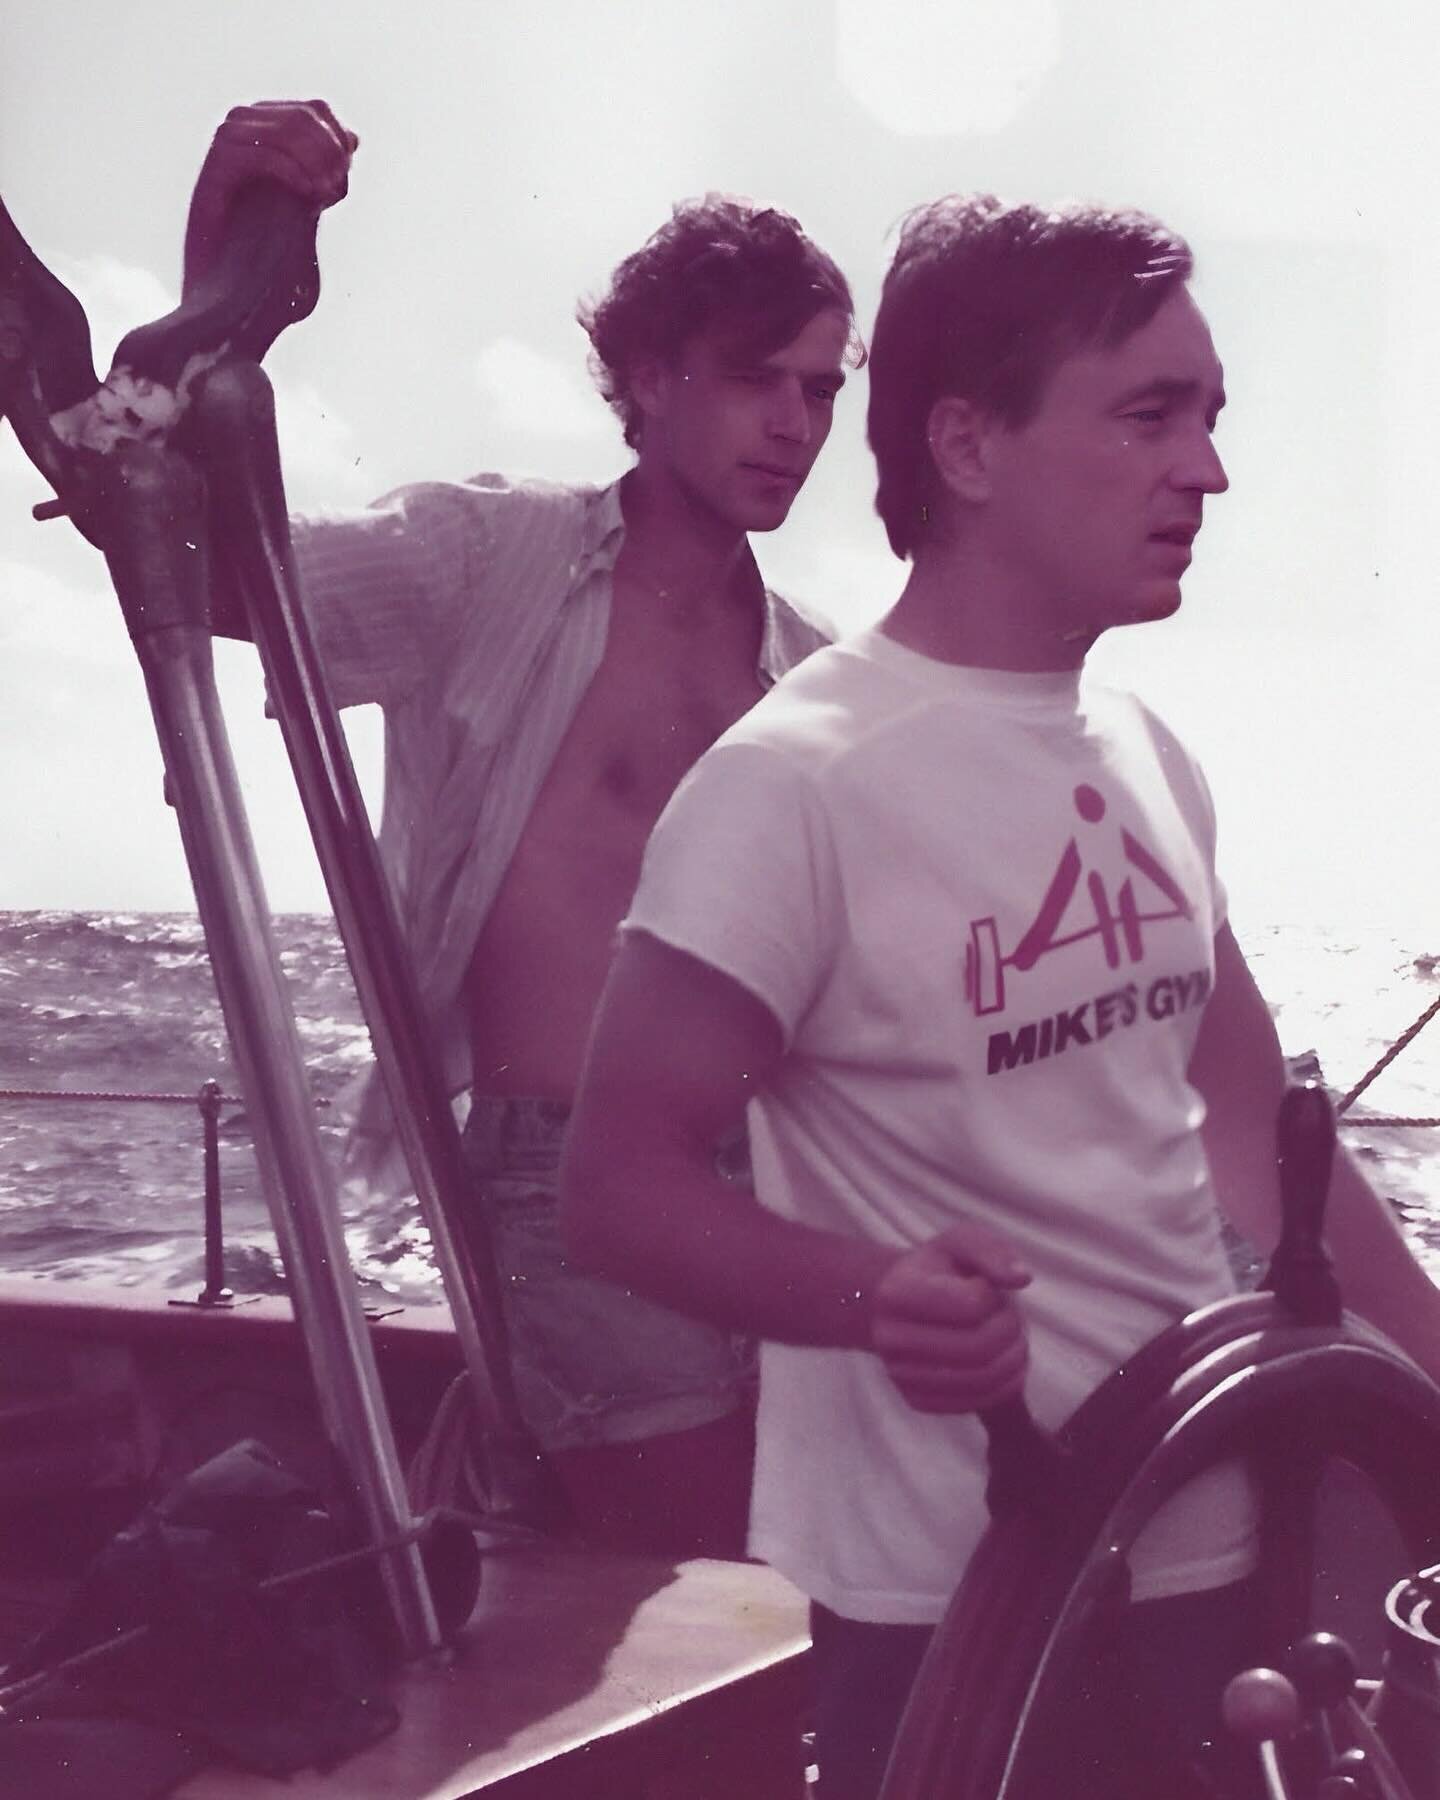 Throwback to Don &amp; G&ouml;ran&rsquo;s early days sailing together!

#Sailing #SailingCommunity #SailingArtists #PleinAirPainting #OutdoorArt #MasterPainters #WorkshopExperience #NatureInspired #CanvasCapture #ArtisticJourney #CreativeRetreat #Pai